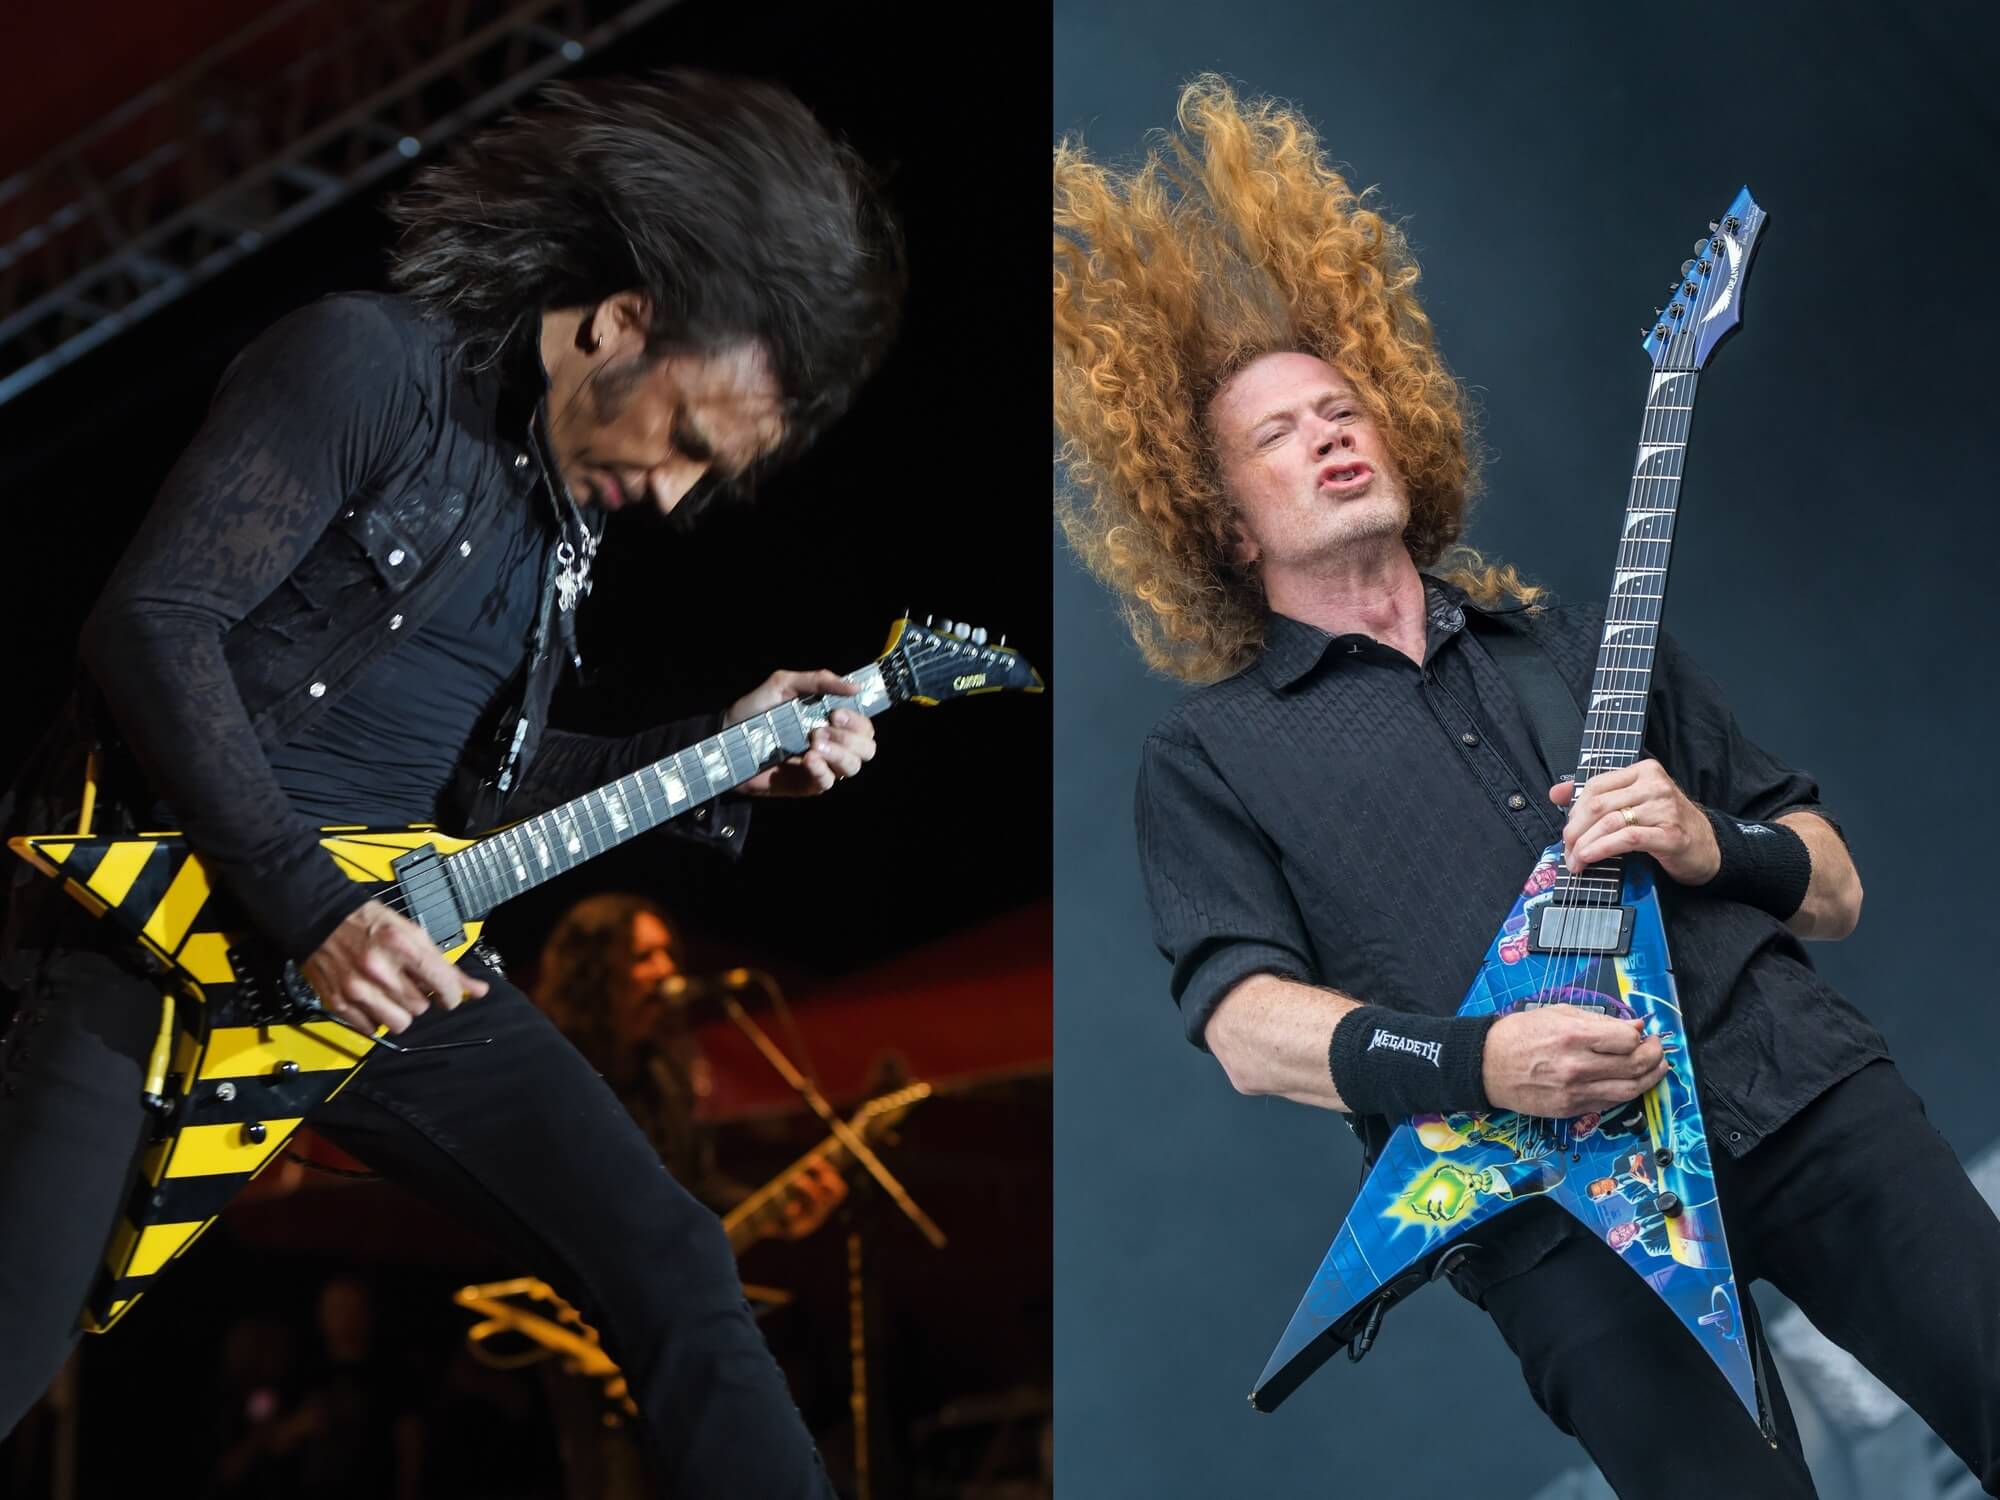 Michael Sweet of Stryper and Dave Mustaine of Megadeth